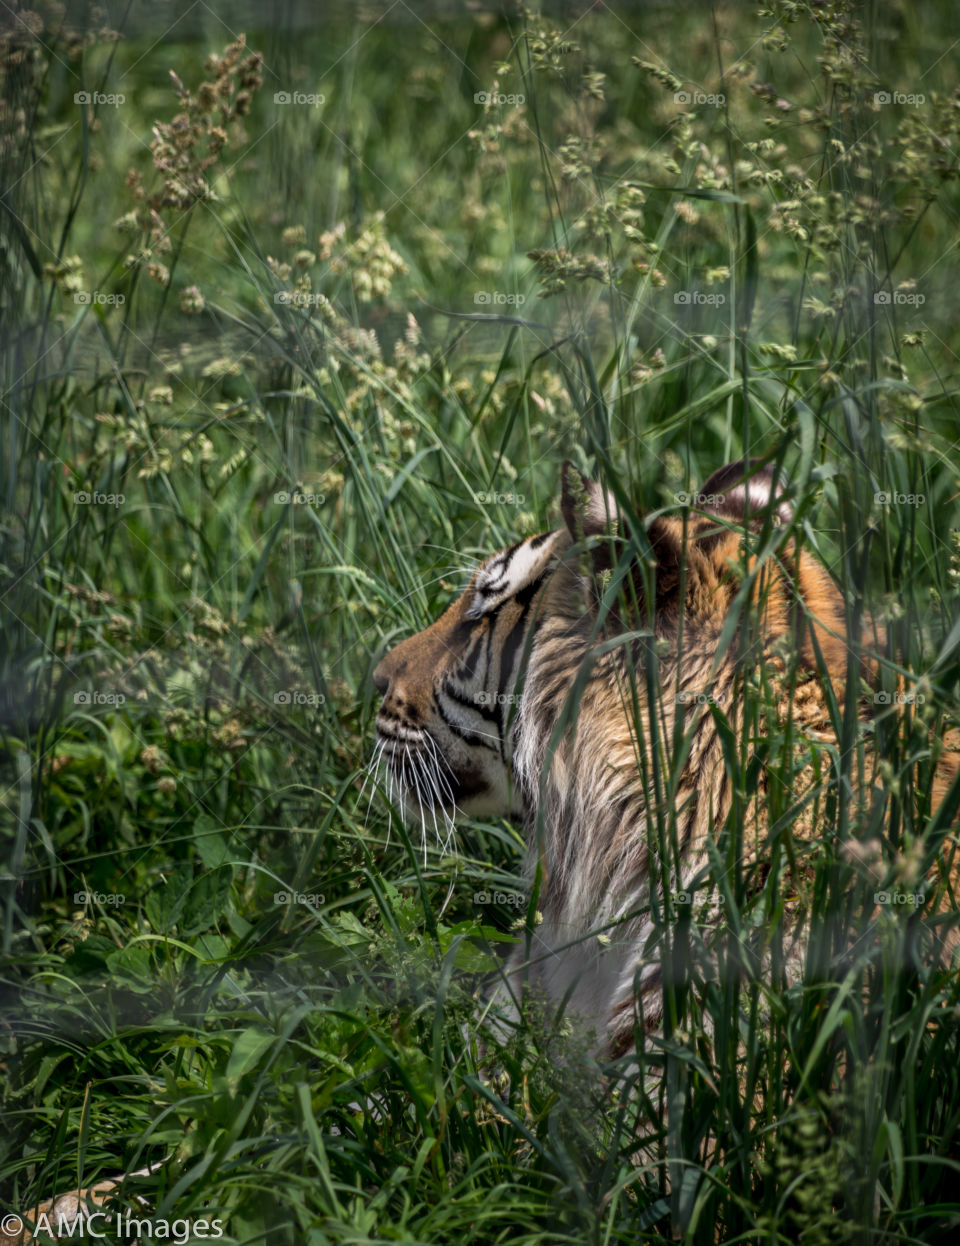 Tiger hiding in the grass. Siberian Tiger crouched in the grass